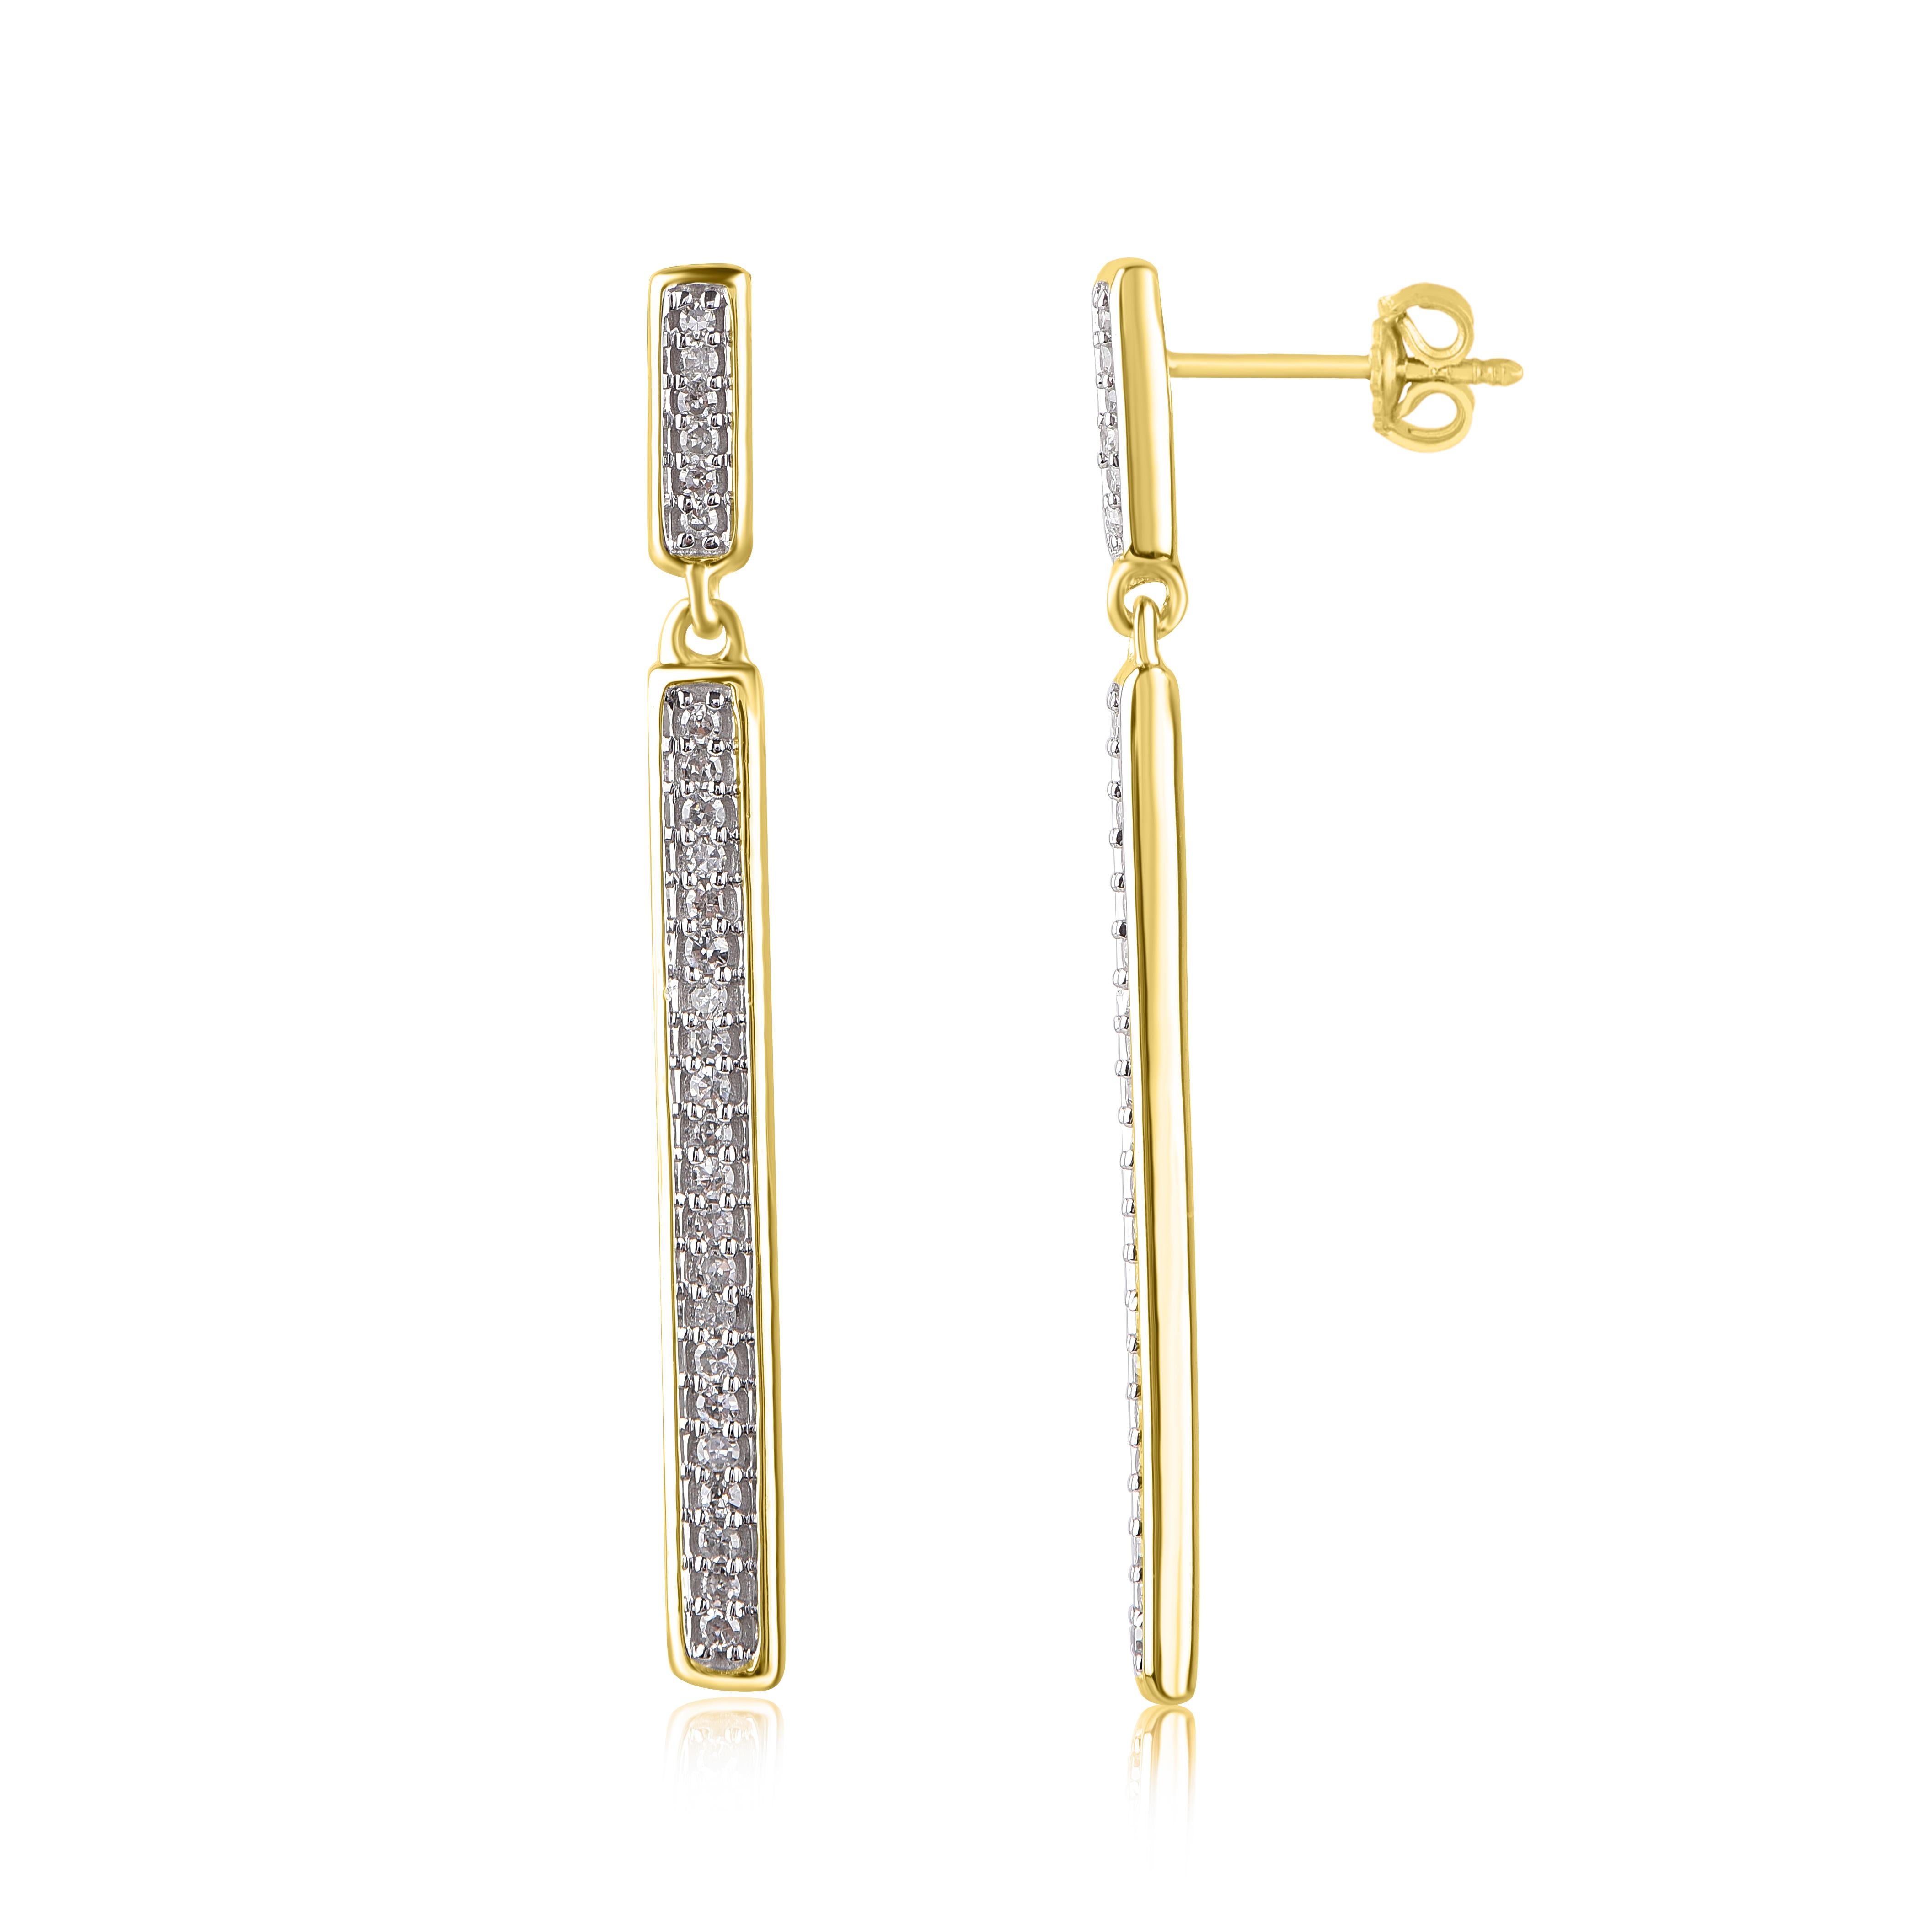 Sweet loving and Simple these diamond linear drop earrings fit any occasion with ease in 14 karat yellow gold with 54 round diamond set in pave setting. These sparkling dangling linear drop earrings secure comfortably with post backs. Shines in H-I